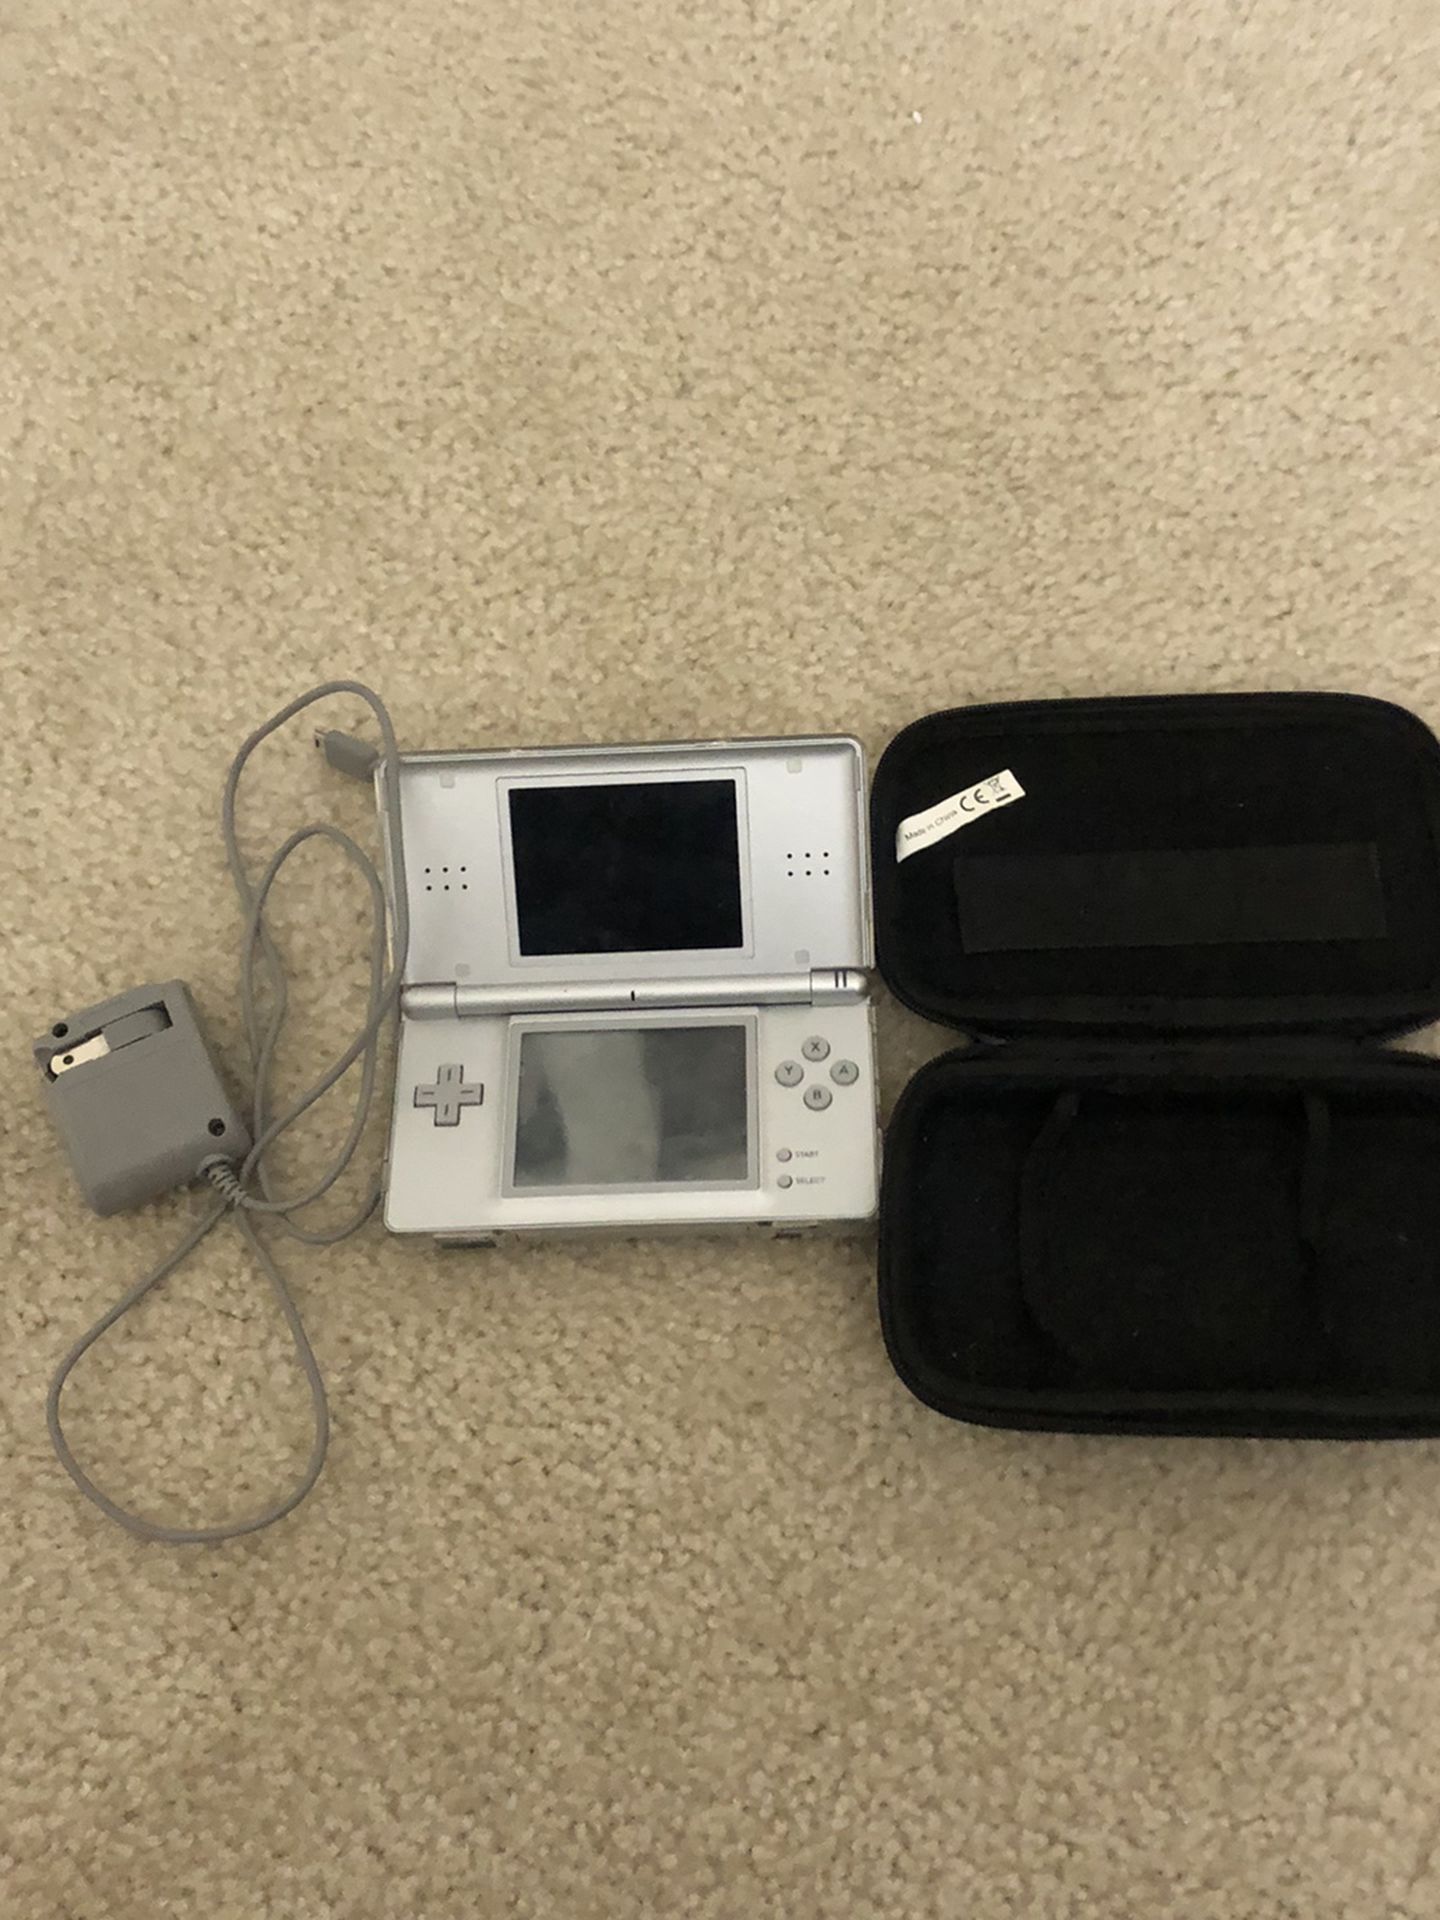 Nintendo DS Lite with Game and Case